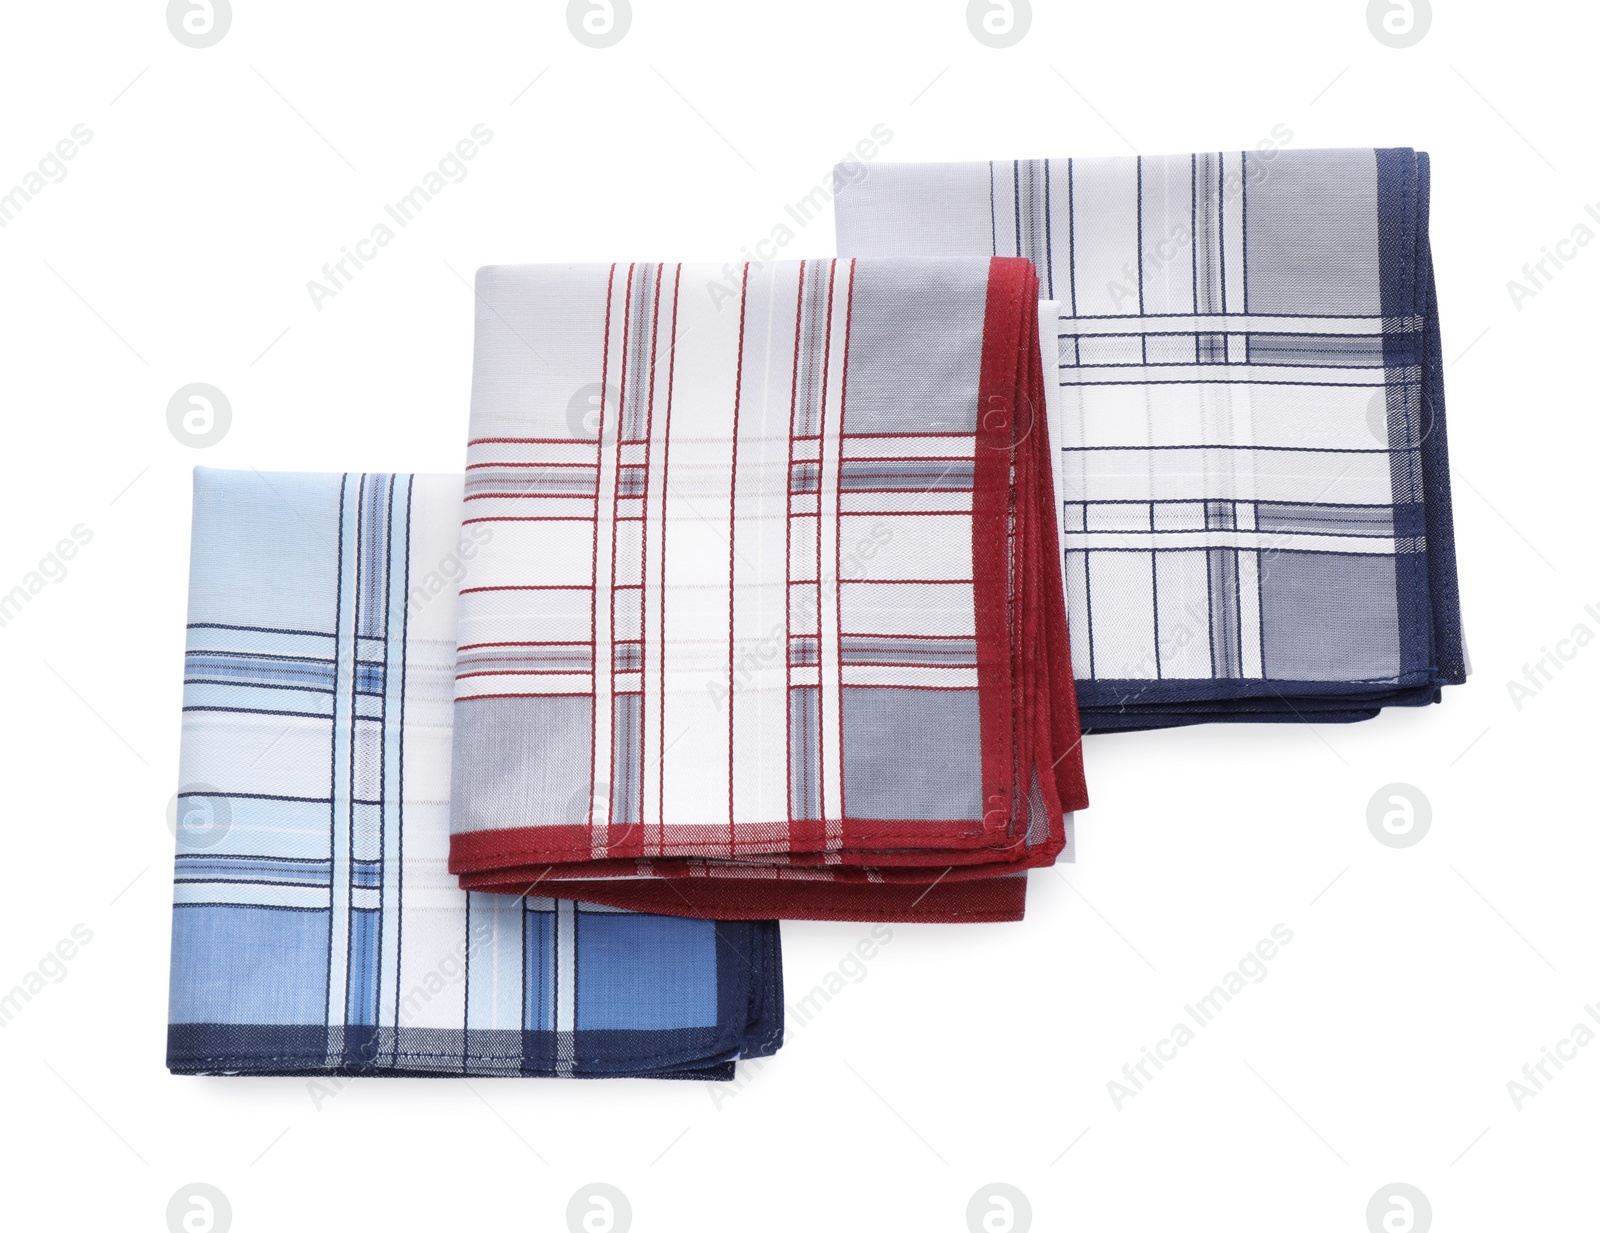 Photo of Stylish handkerchiefs on white background, top view